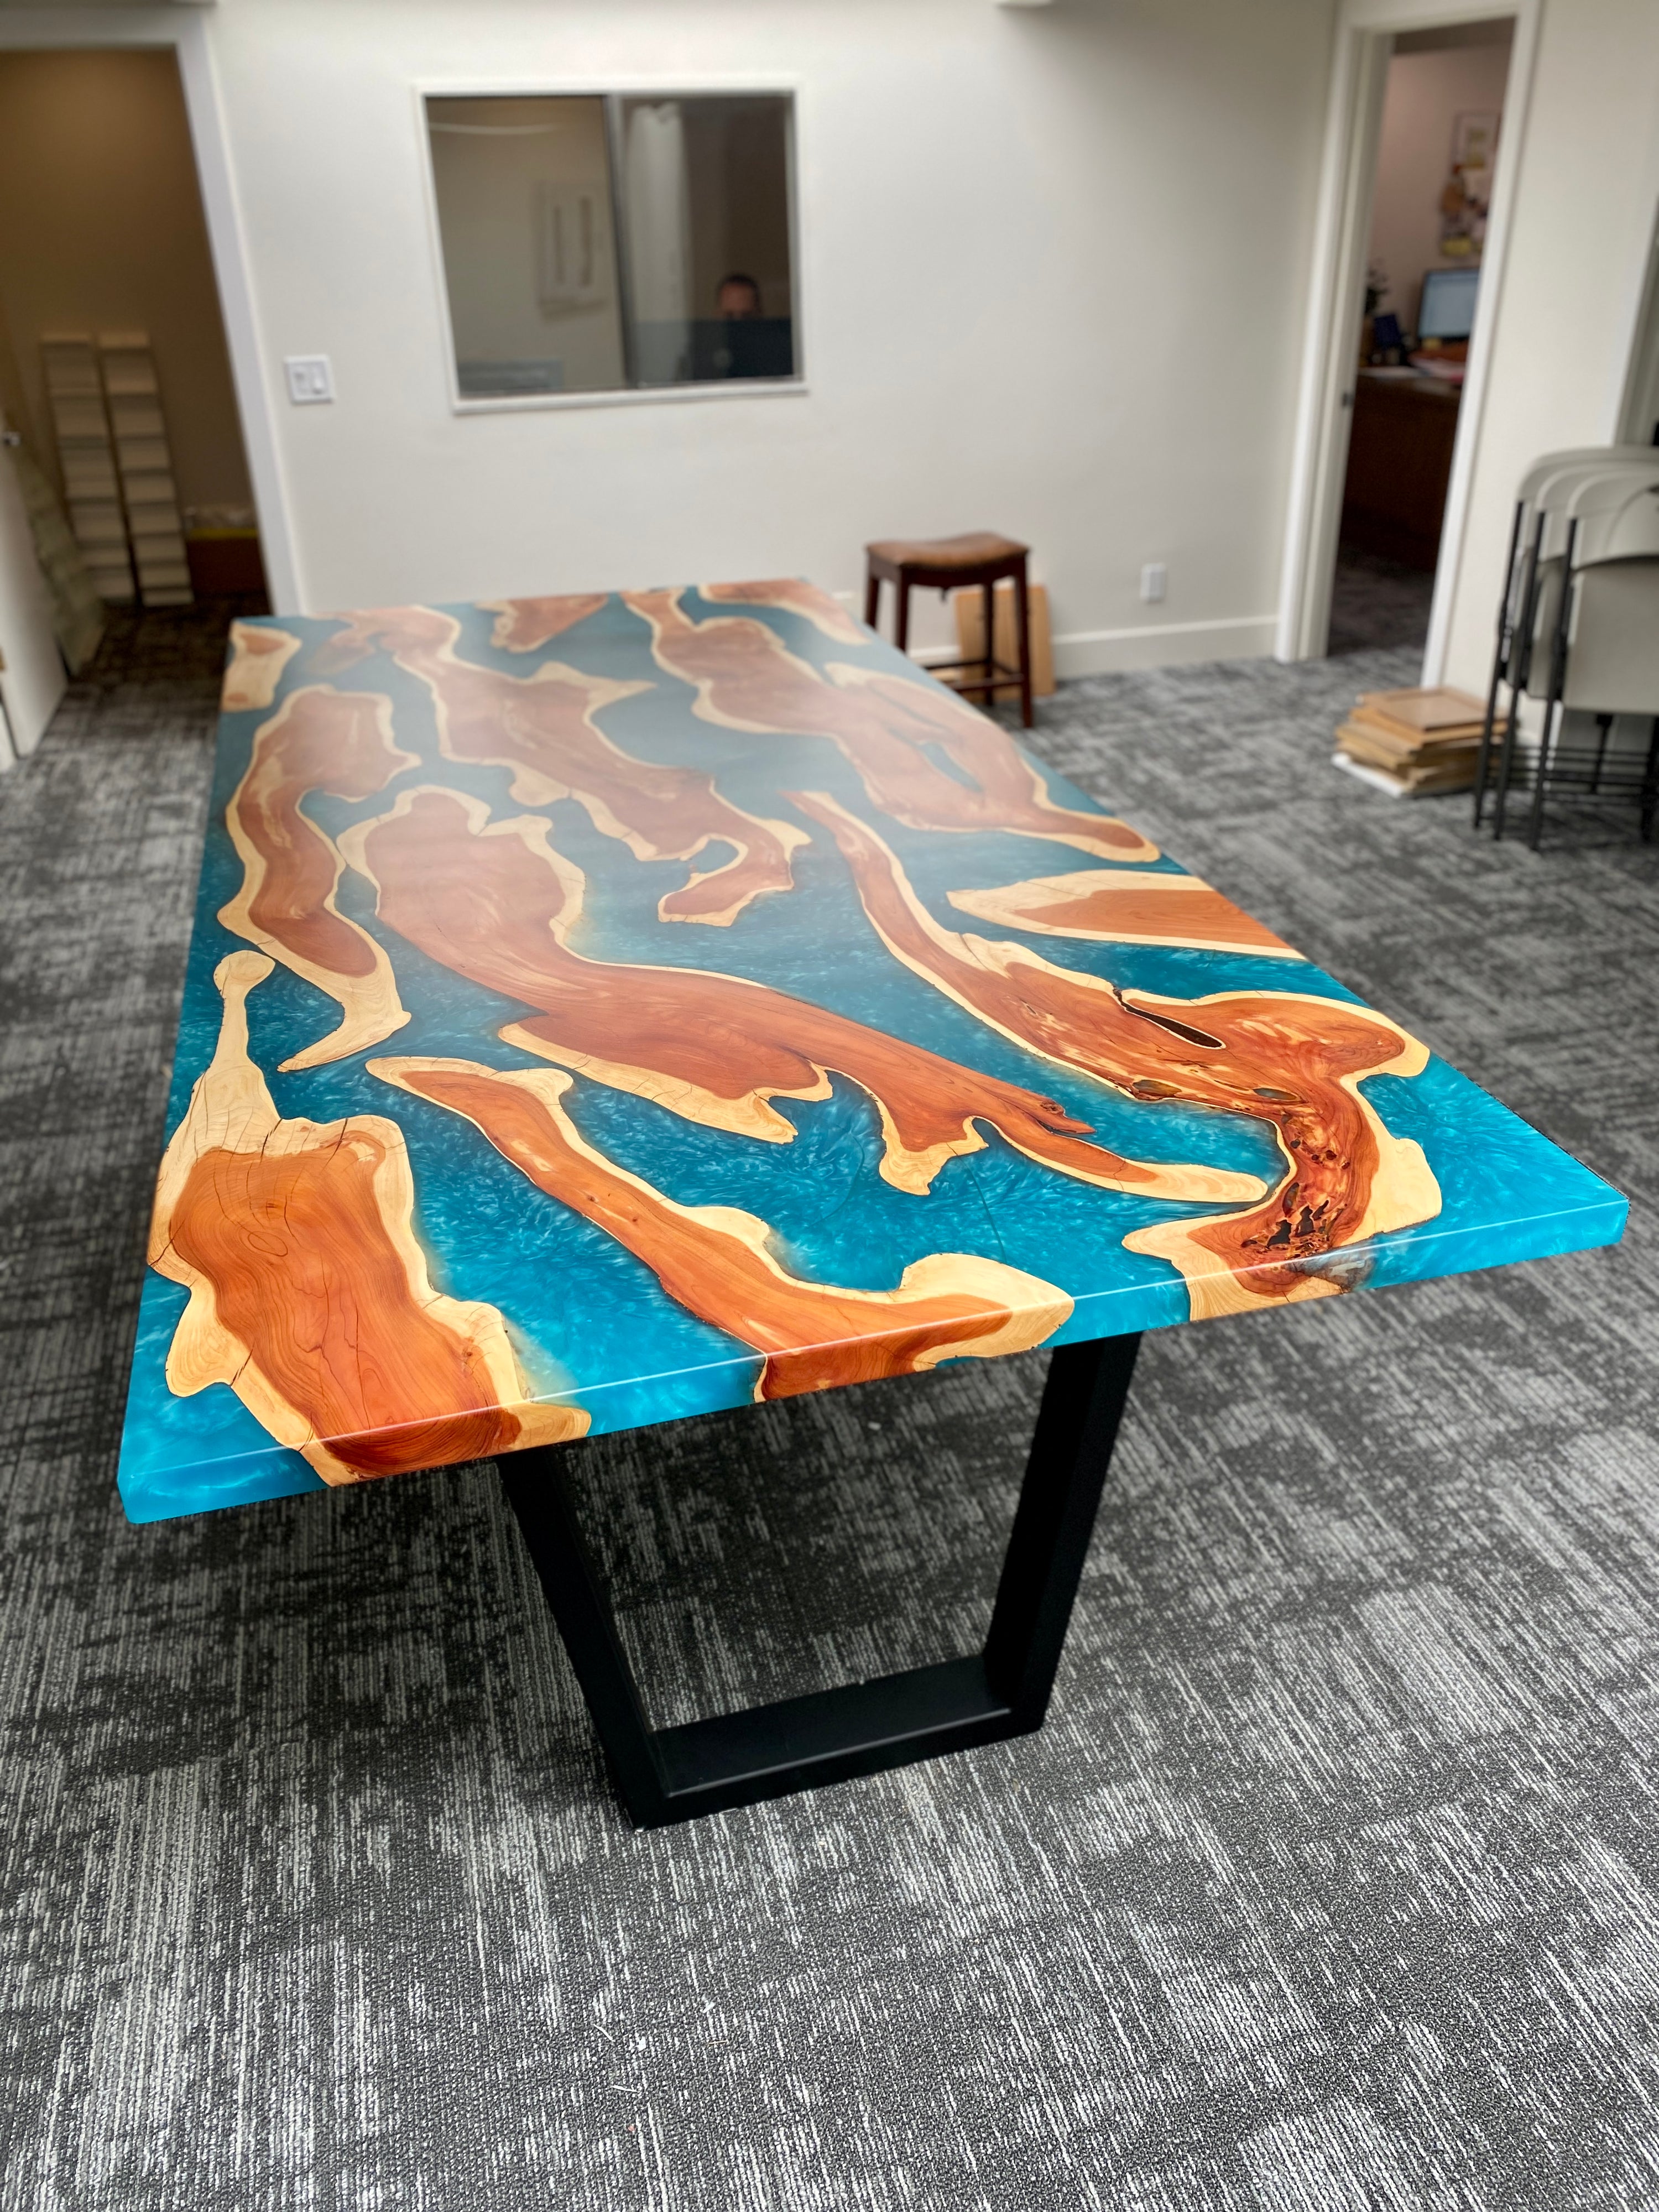 custom conference tables - Exclusive design